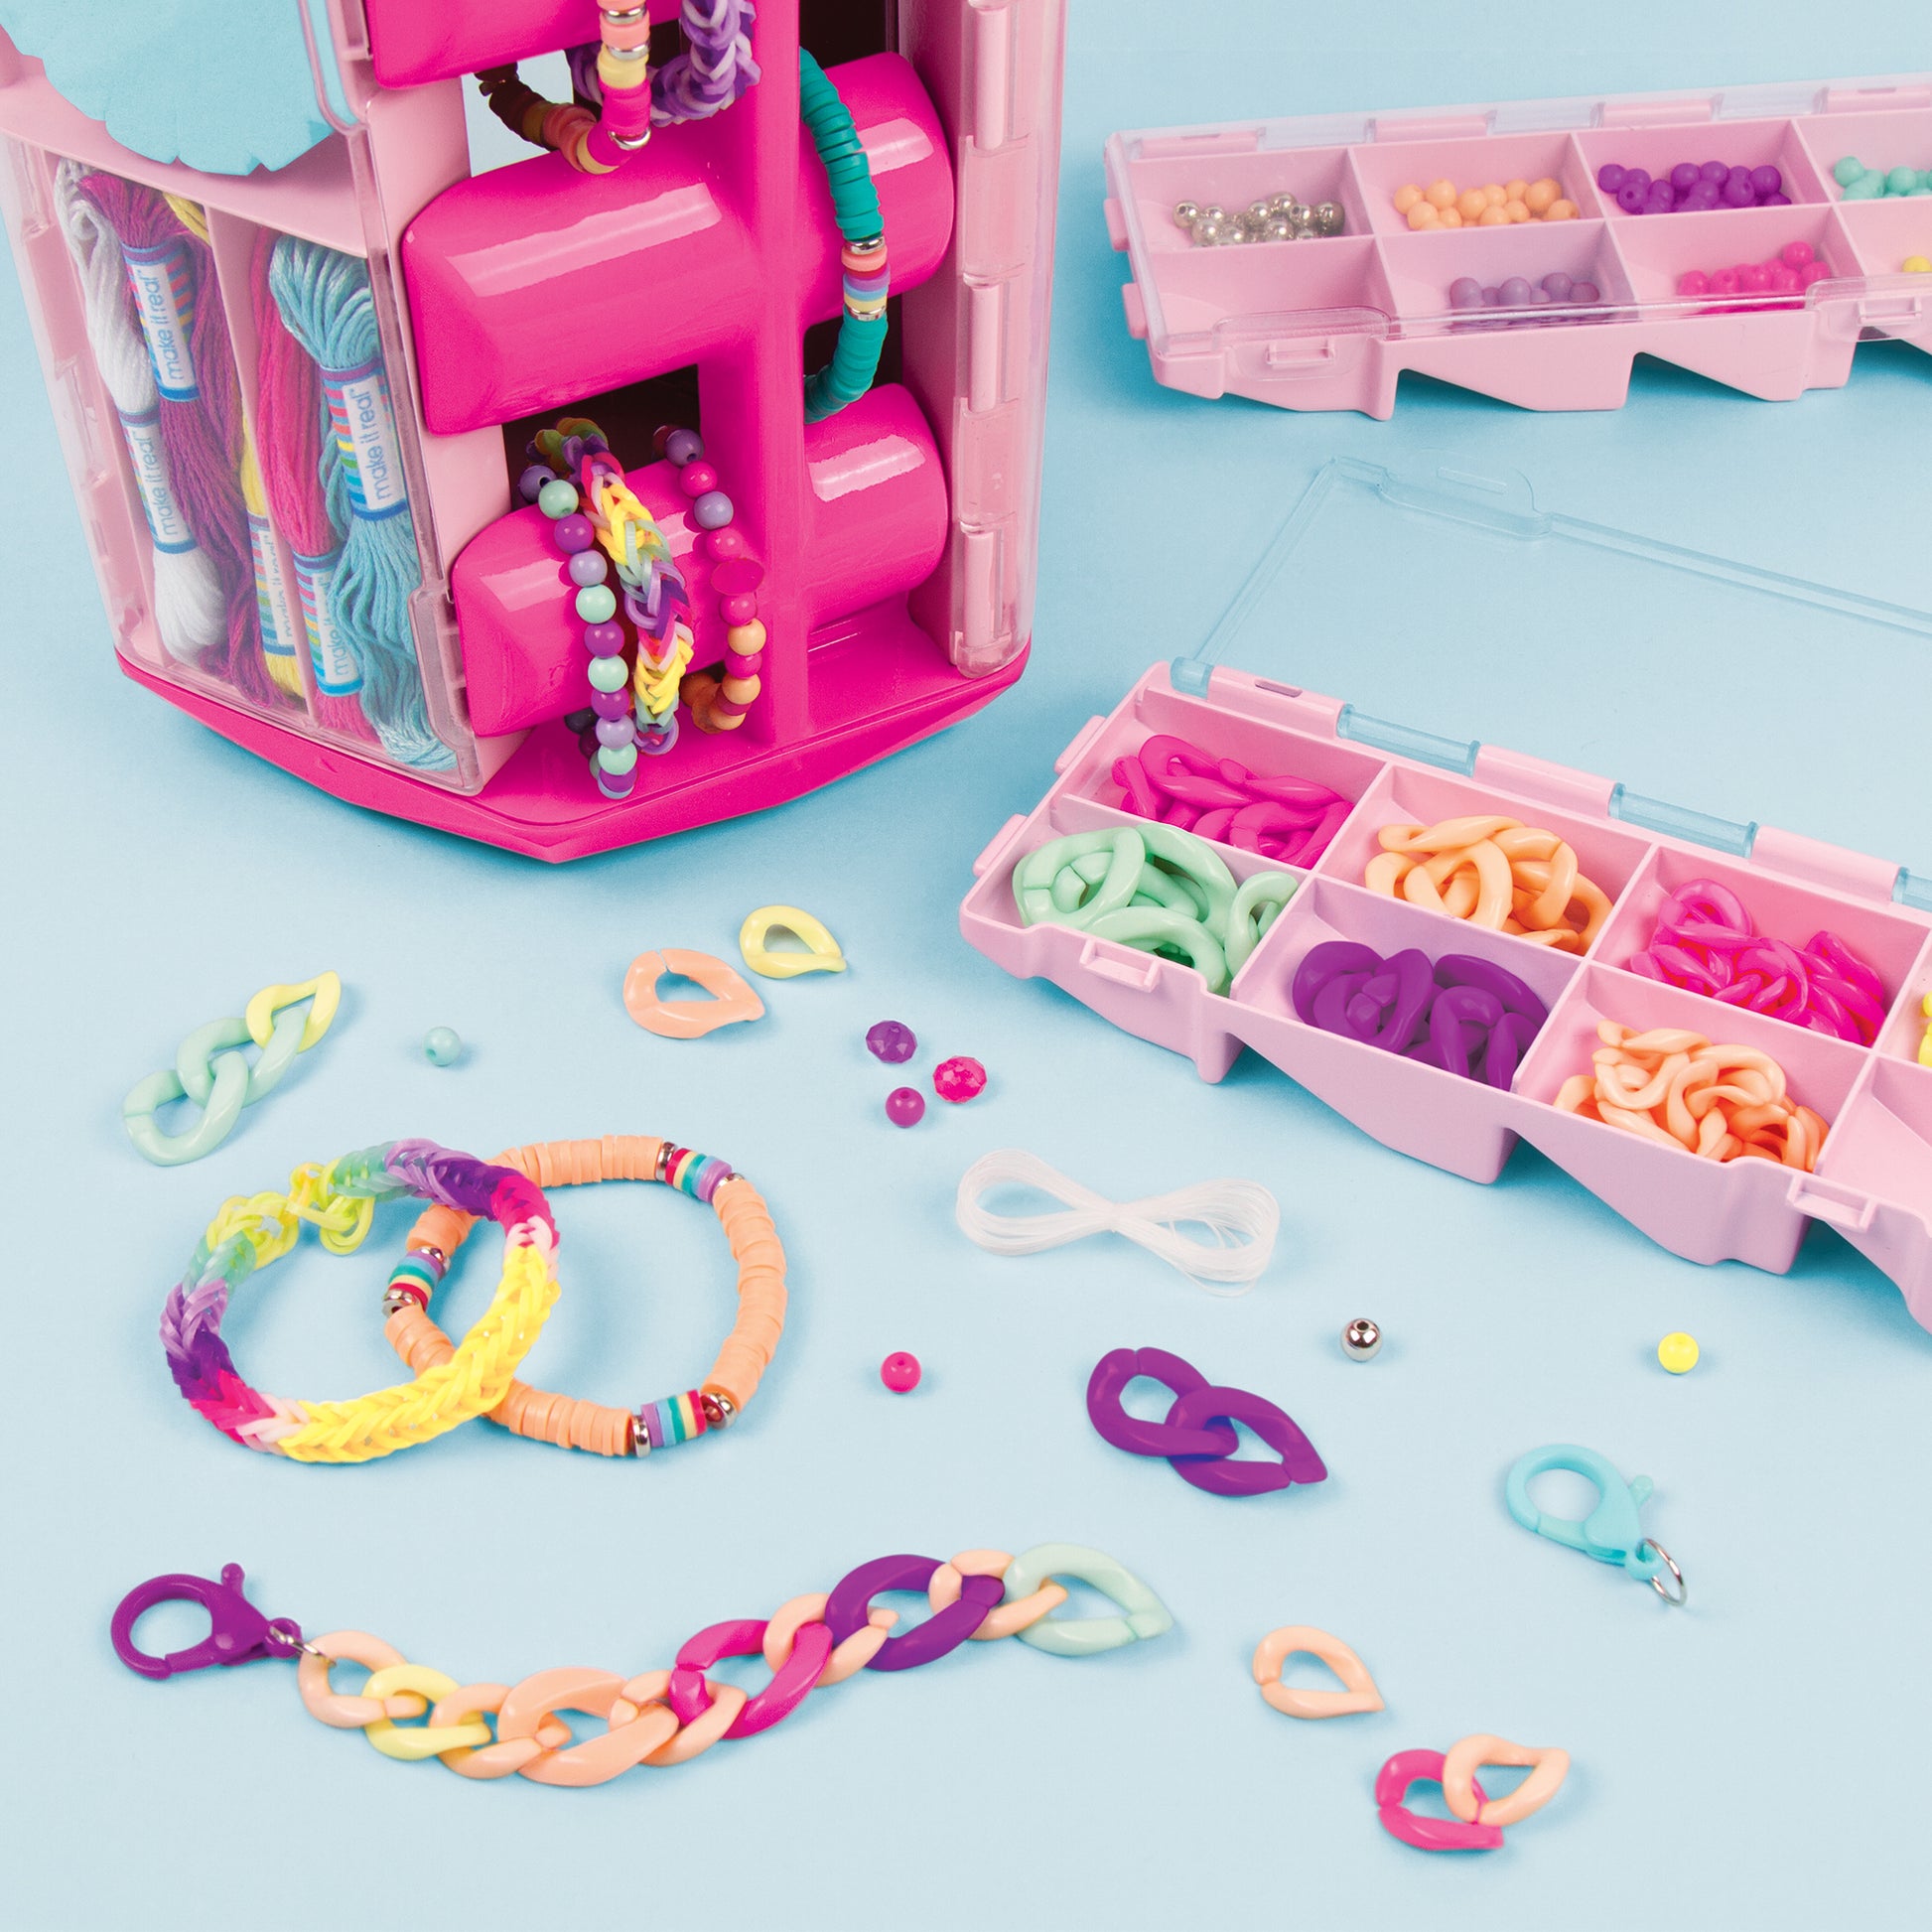  Make it Real 5 in 1 Activity Tower - Jewelry Making